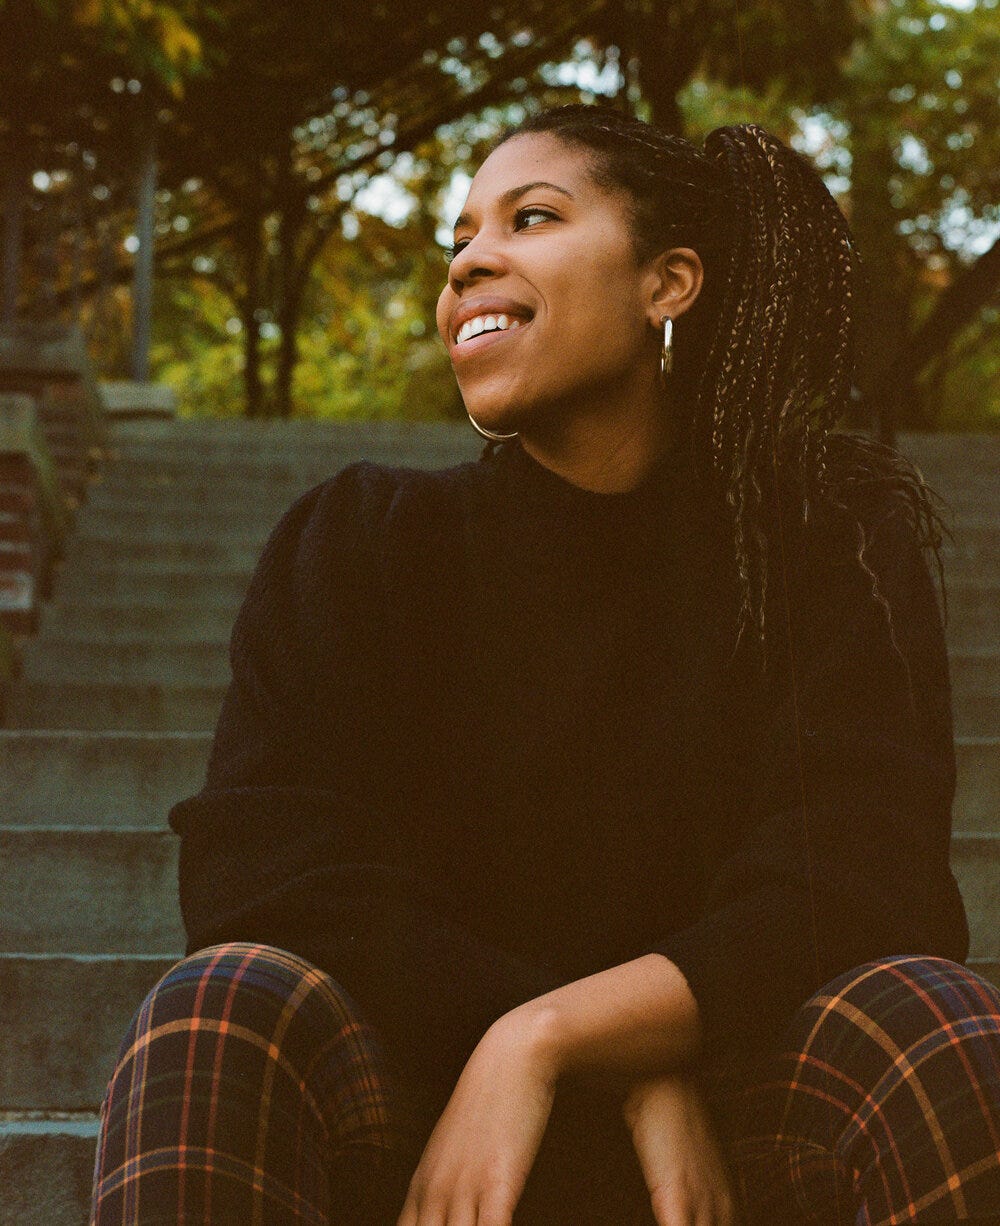 Nia, a Black person with long hair, in a black sweater and plaid orange and blue and black pants - sitting on stone steps looking to the left and smiling coyly